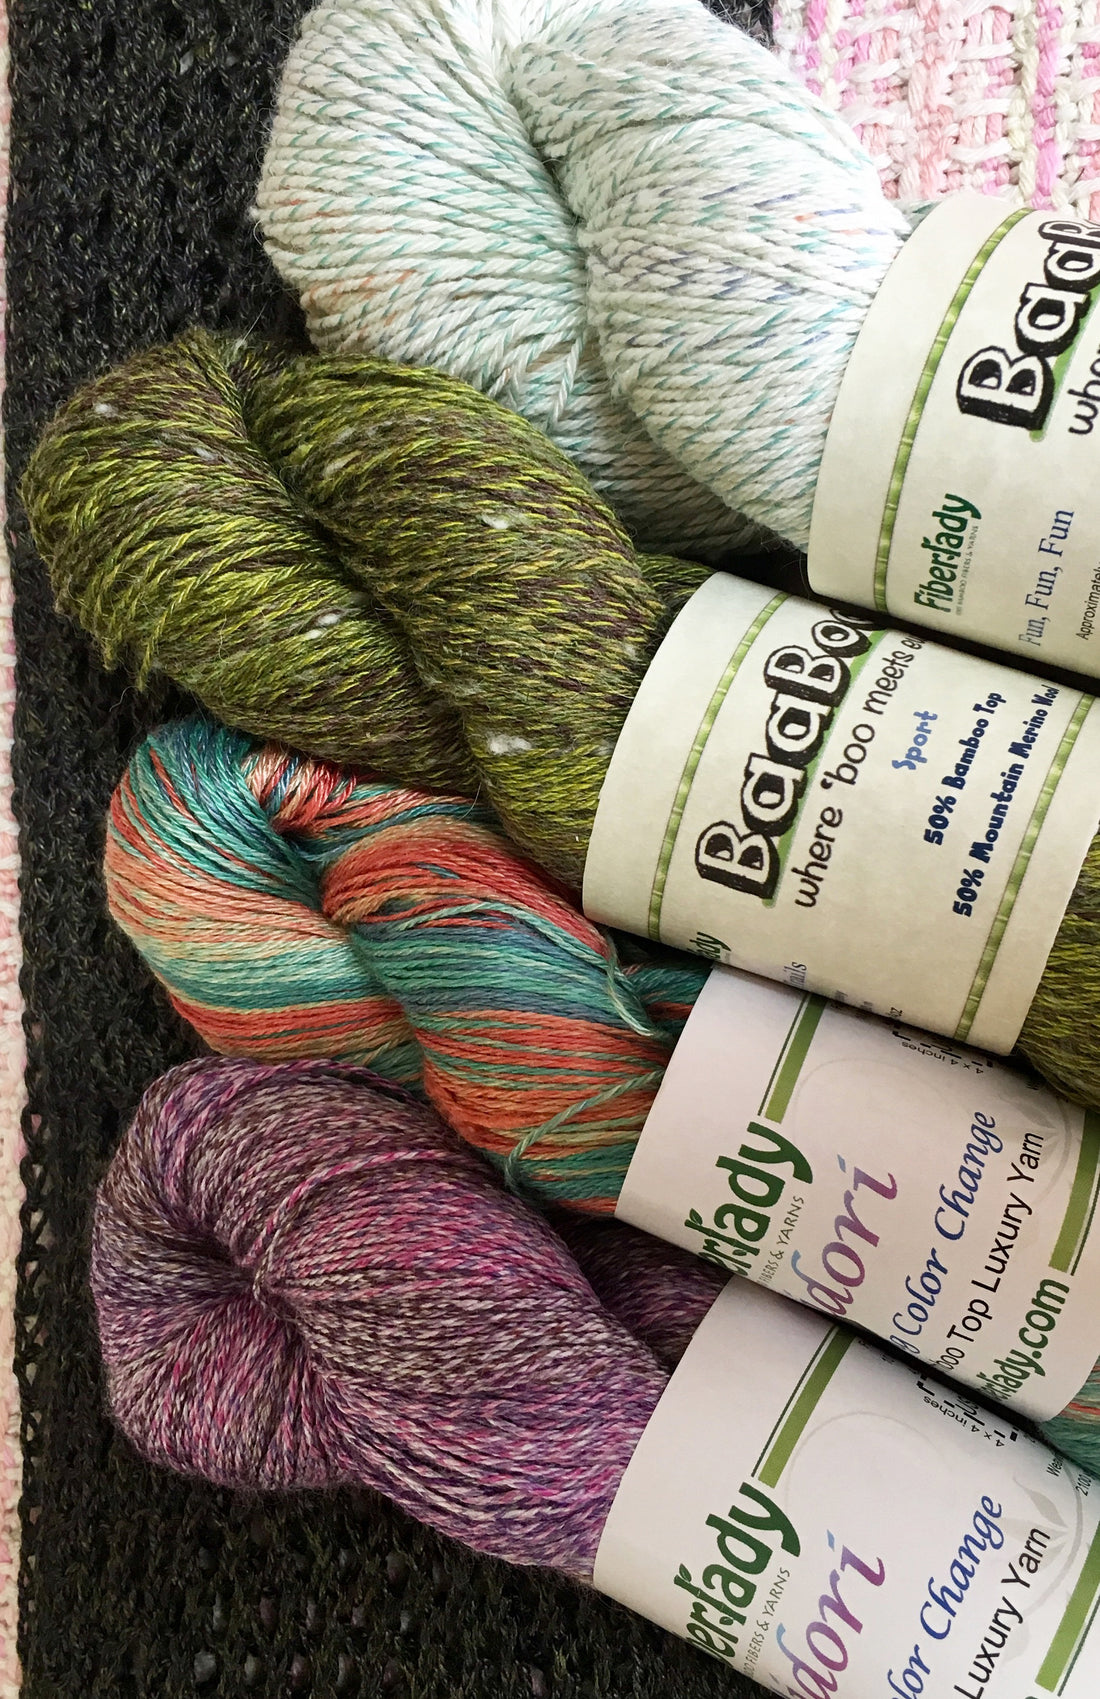 Exciting new yarns coming soon!